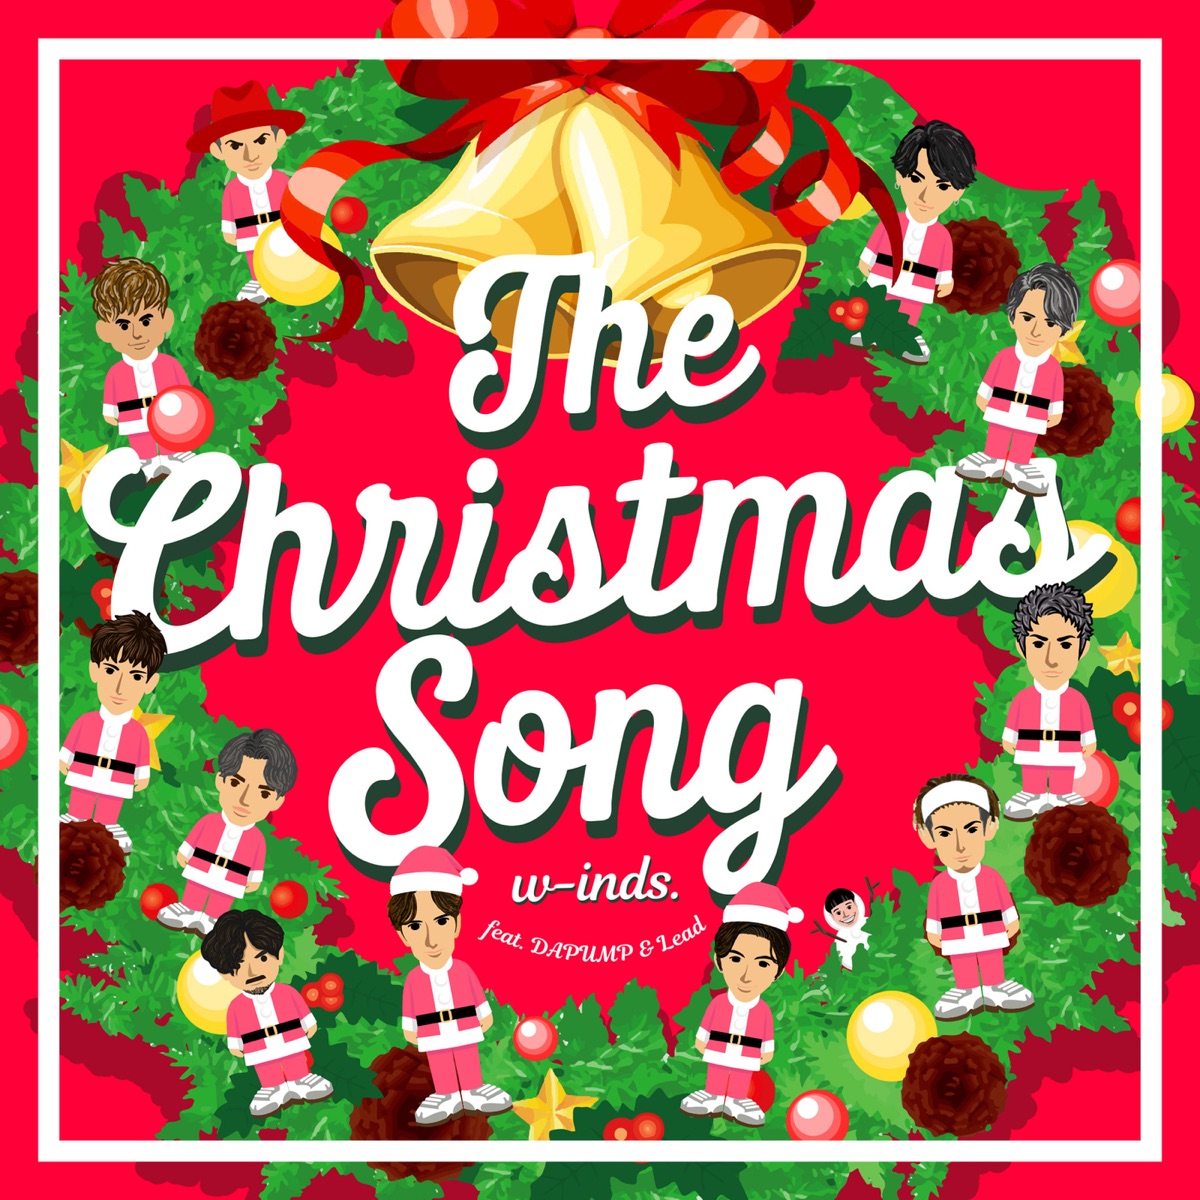 『w-inds. - The Christmas Song (feat. DA PUMP & Lead)』収録の『The Christmas Song (feat. DA PUMP & Lead)』ジャケット